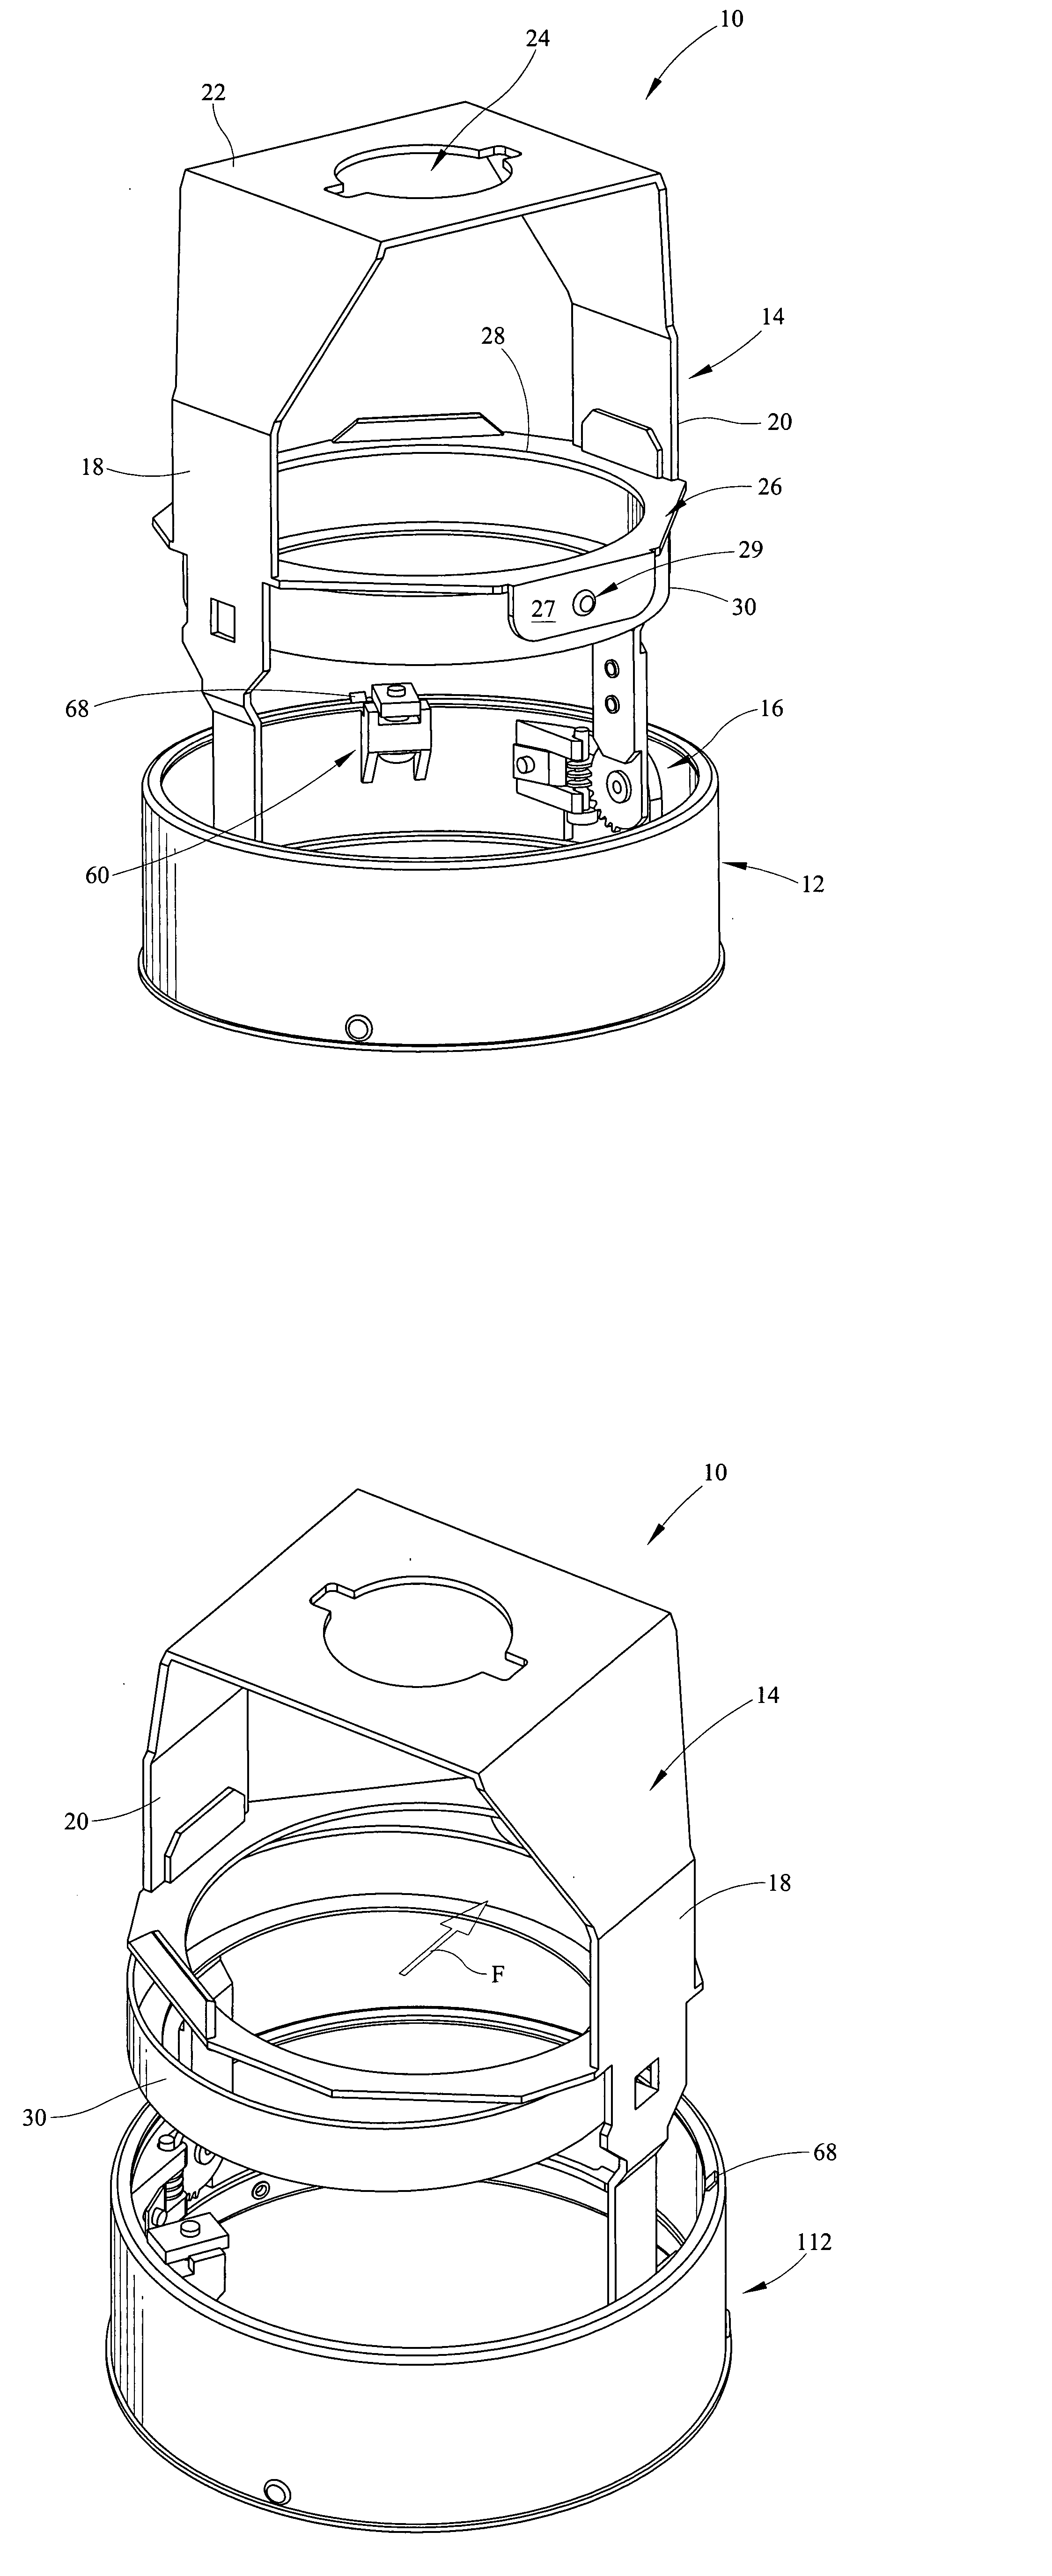 Worm gear drive aiming and locking mechanism